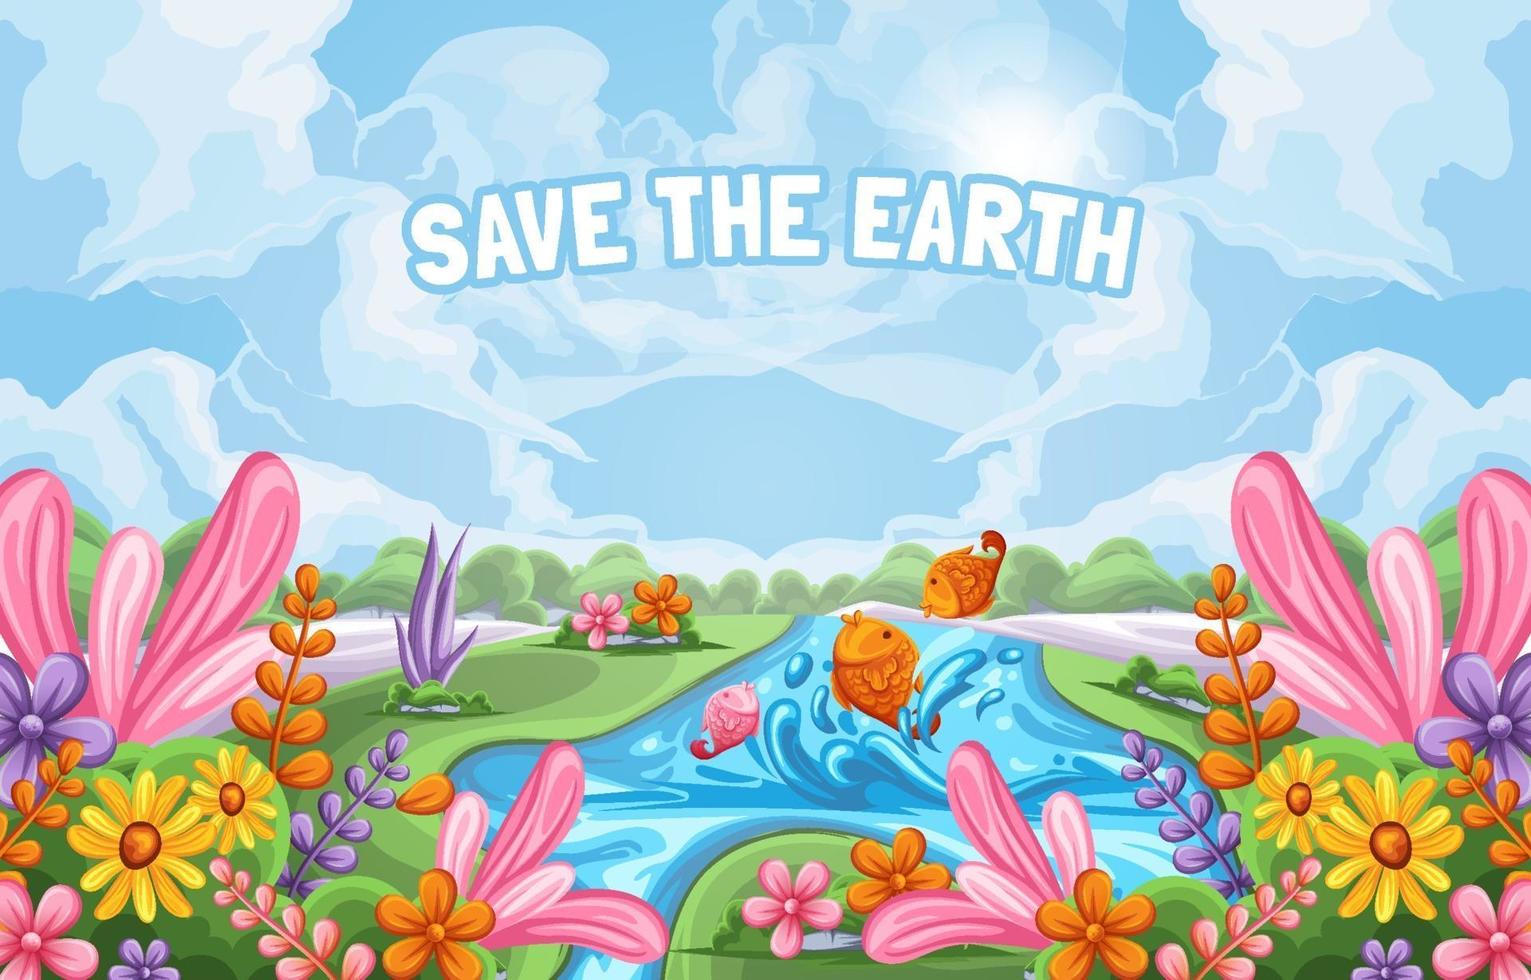 Earth Day Background Illustrations vector